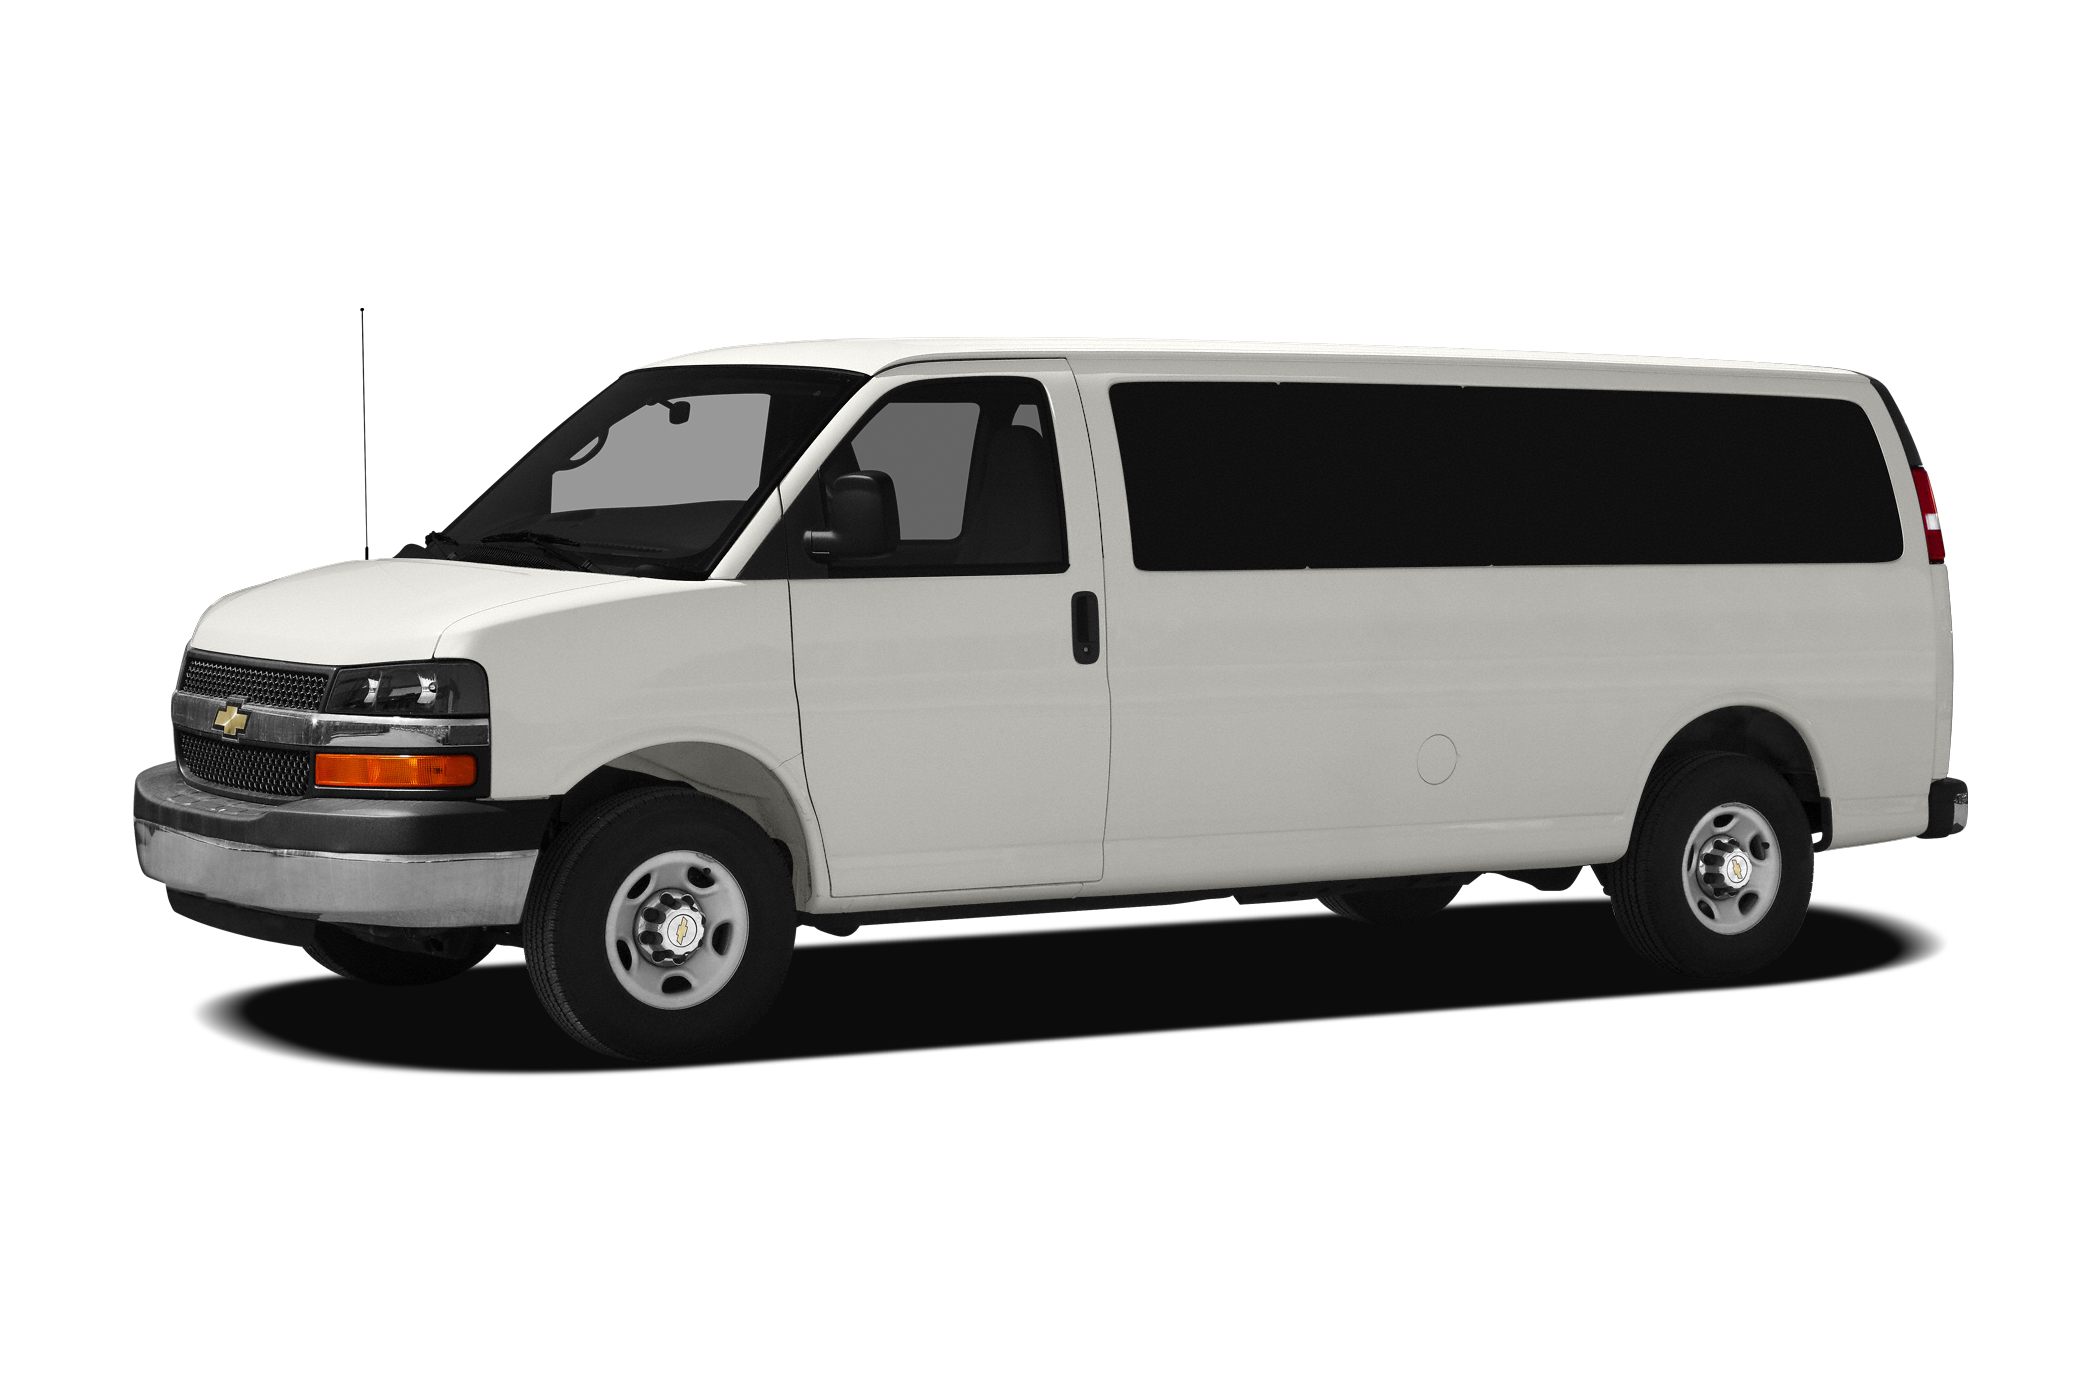 2010 Chevrolet Express 1500 Specs and 